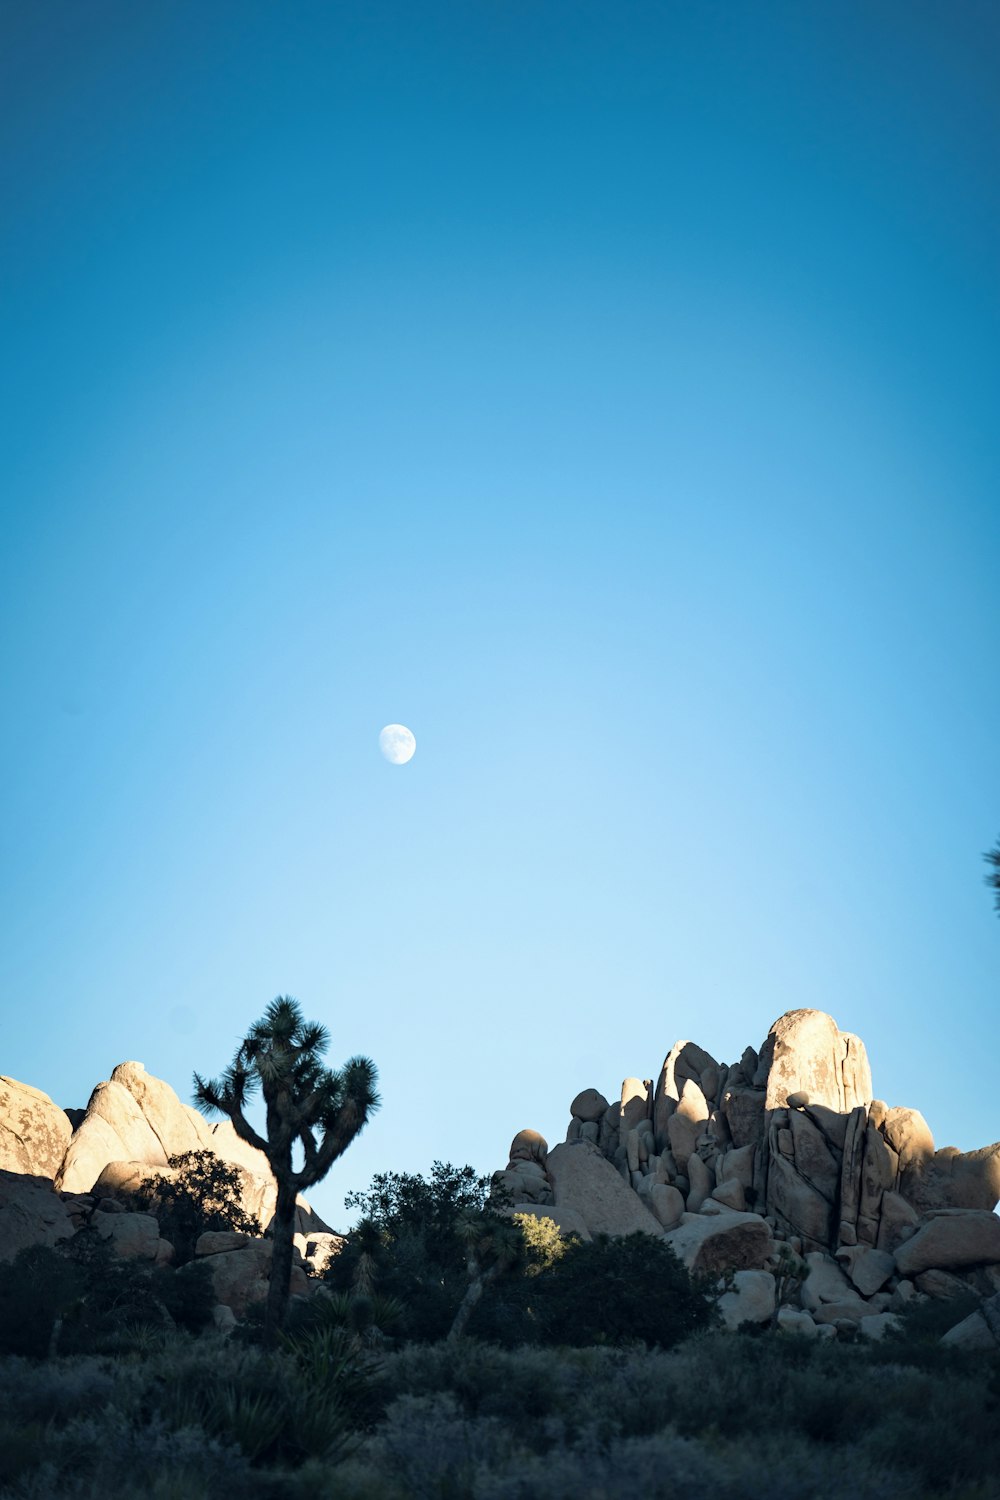 a full moon is seen in the sky above some rocks